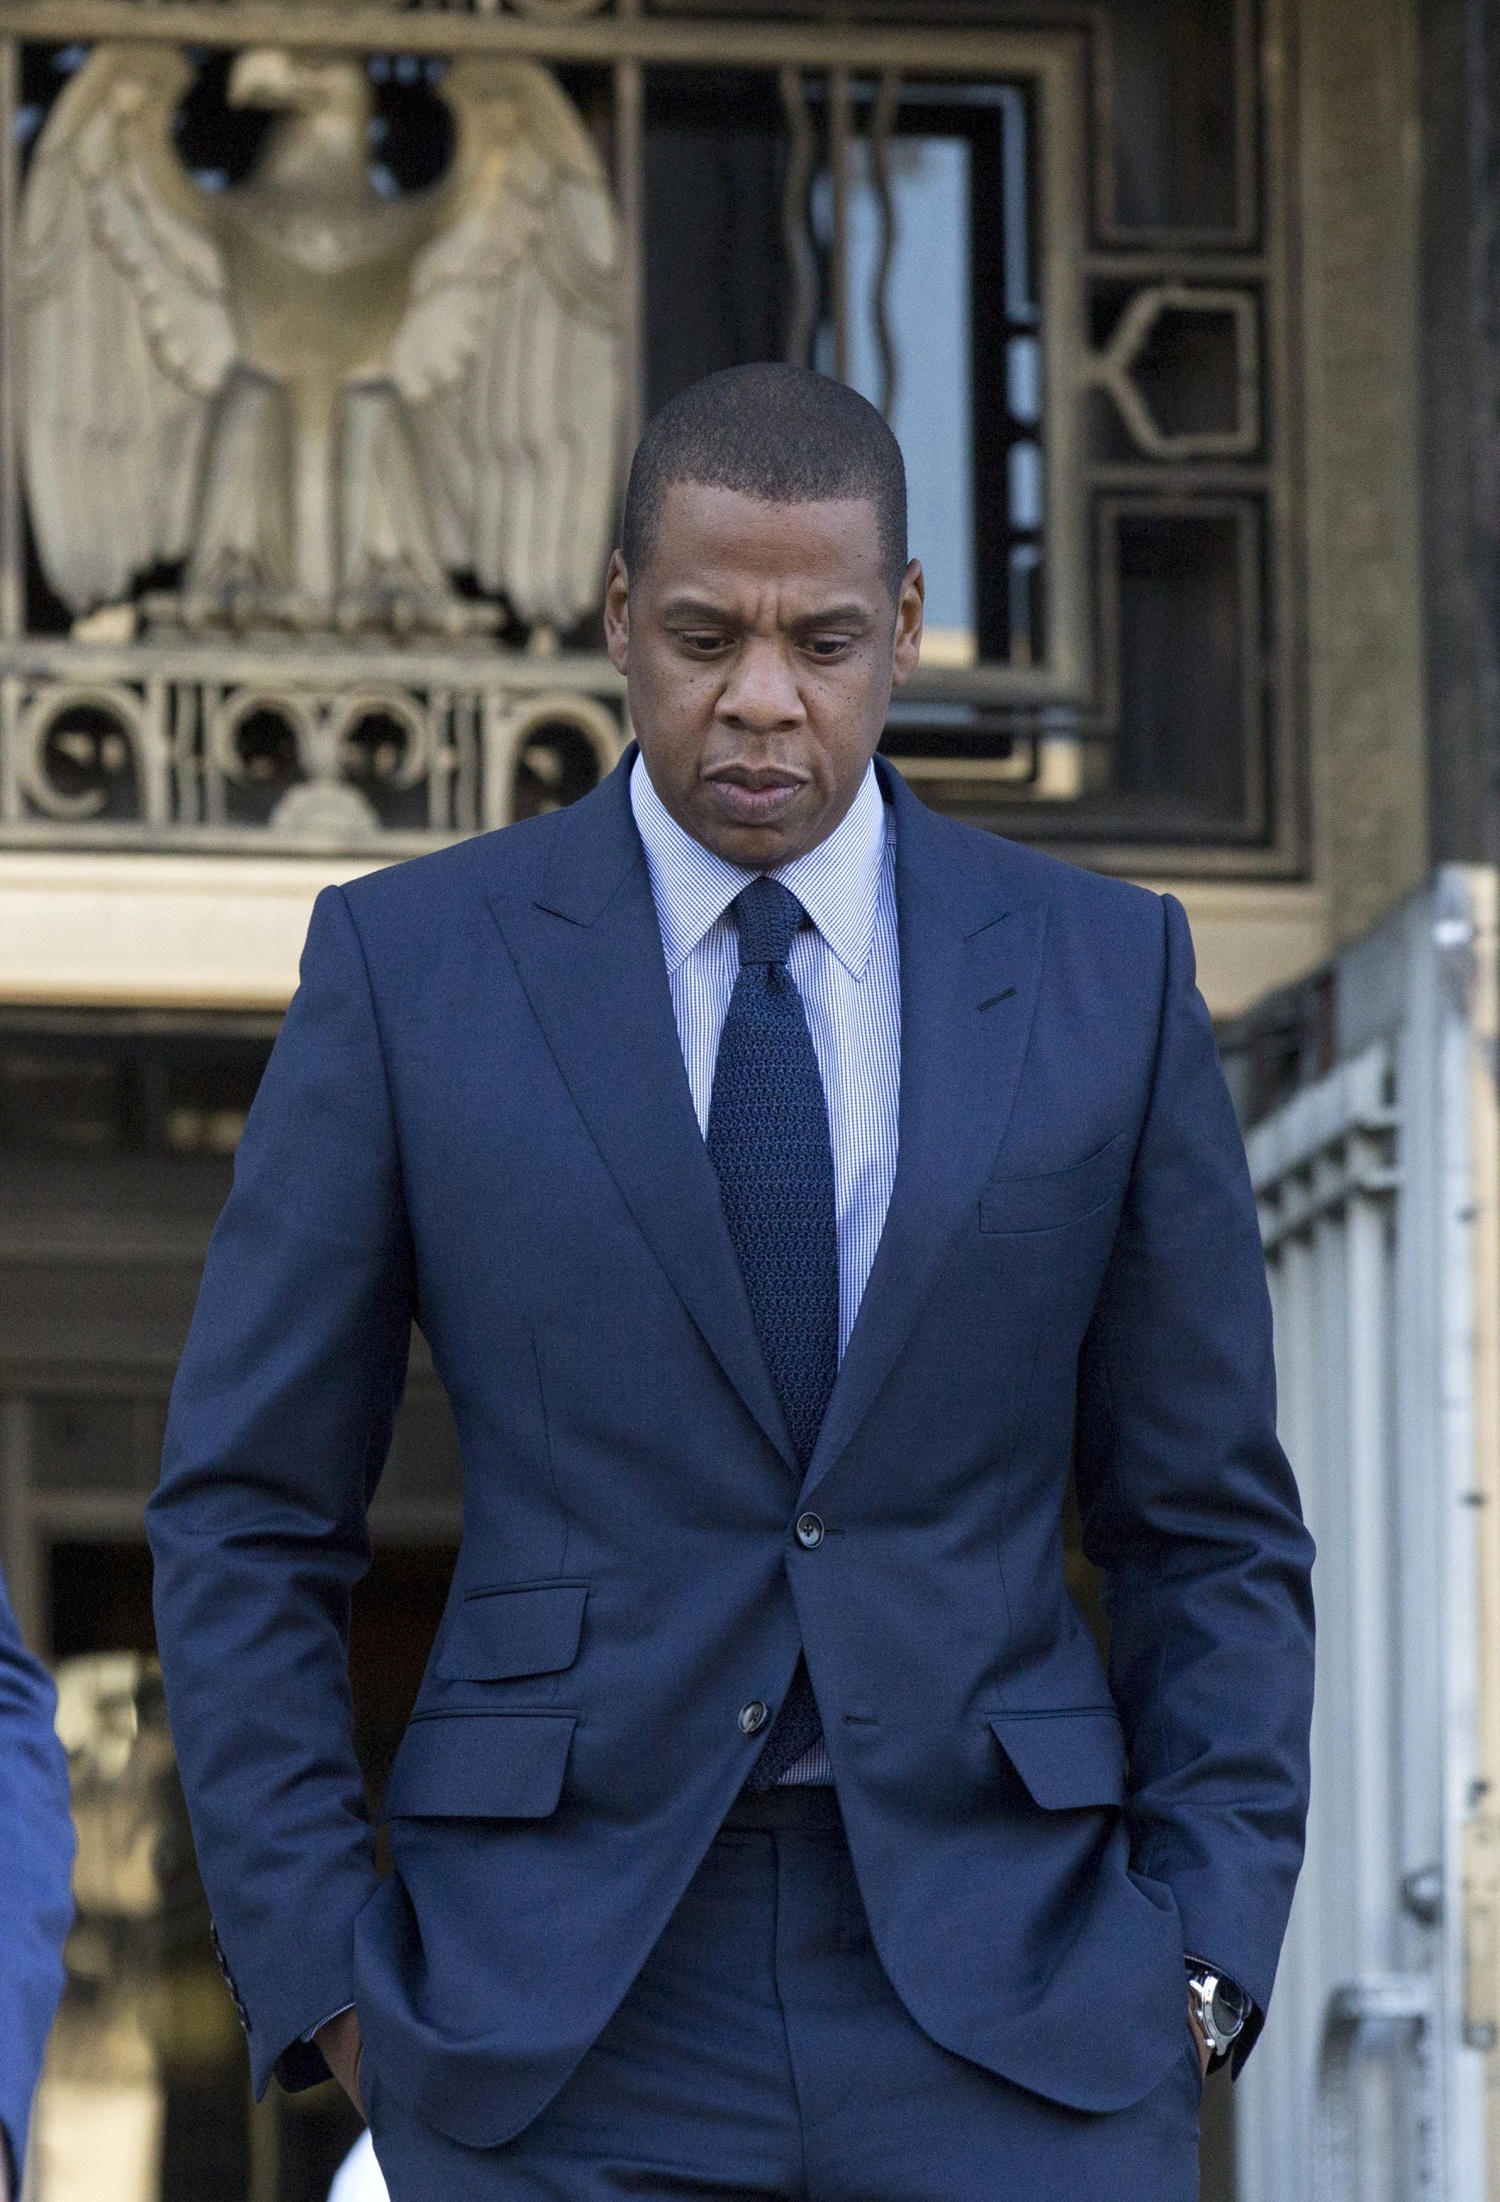 99 Problems: Jay Z in Court Over His Hit Song 'Big Pimpin